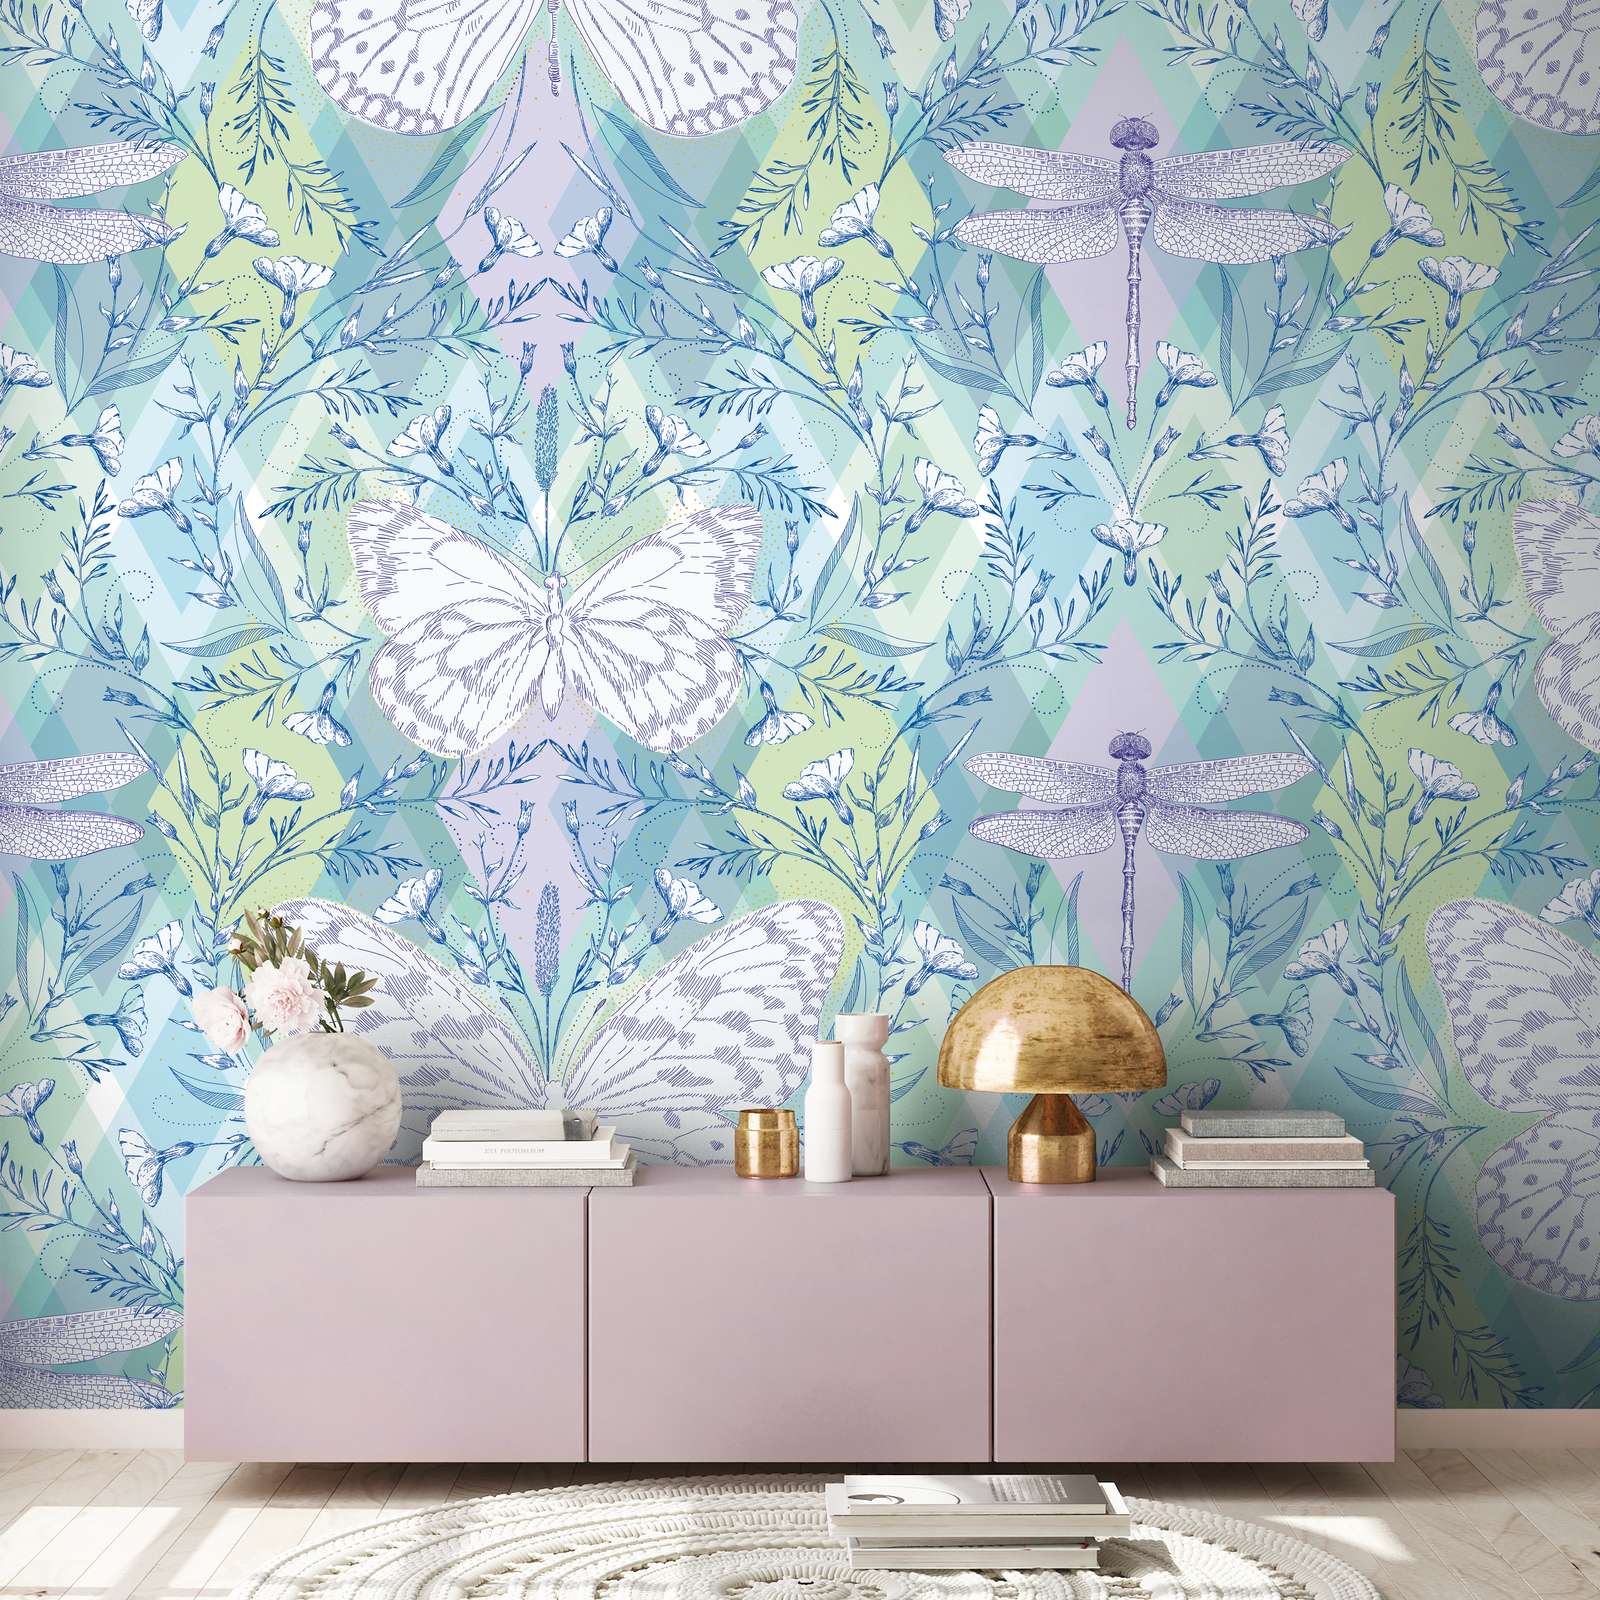             Diamond pattern wallpaper with butterflies and dragonflies - multicoloured, green, purple
        